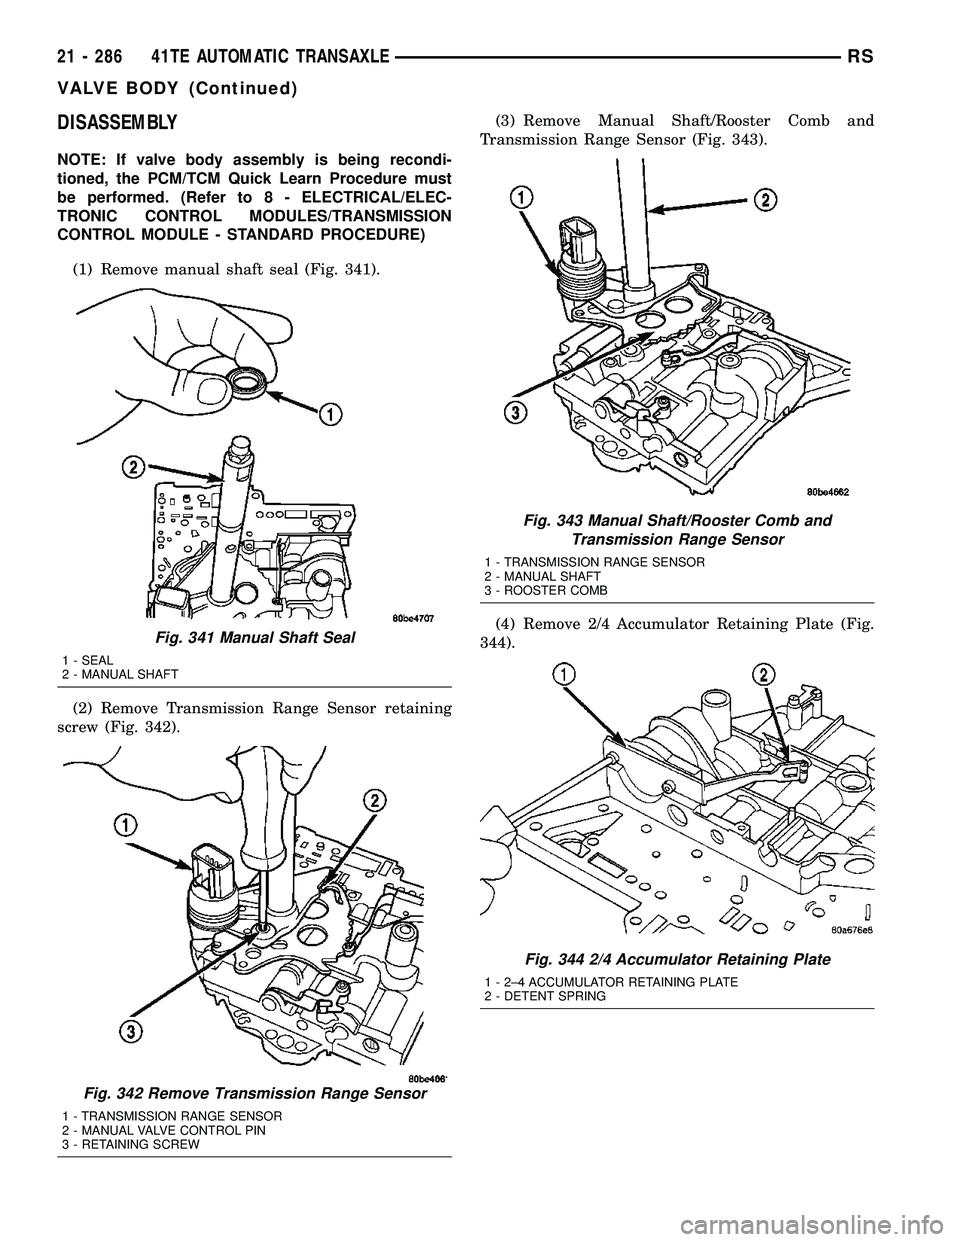 CHRYSLER VOYAGER 2005  Service Manual DISASSEMBLY
NOTE: If valve body assembly is being recondi-
tioned, the PCM/TCM Quick Learn Procedure must
be performed. (Refer to 8 - ELECTRICAL/ELEC-
TRONIC CONTROL MODULES/TRANSMISSION
CONTROL MODUL